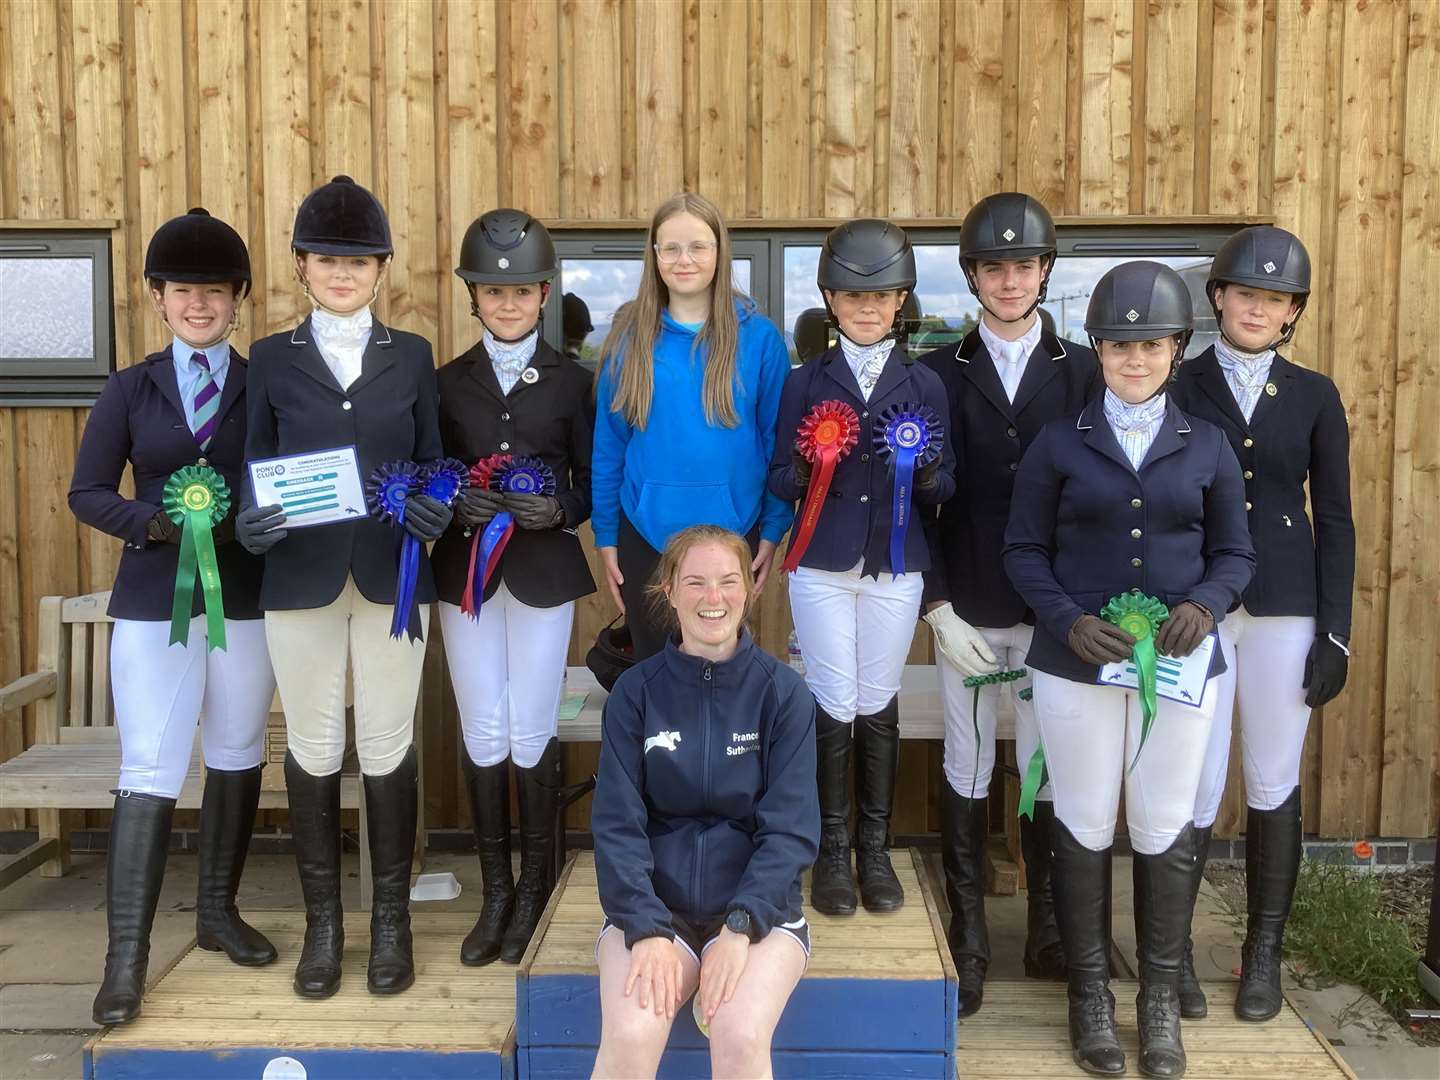 All the riders who took part, along with coach Frances Sutherland (front), after the dressage prize-giving.